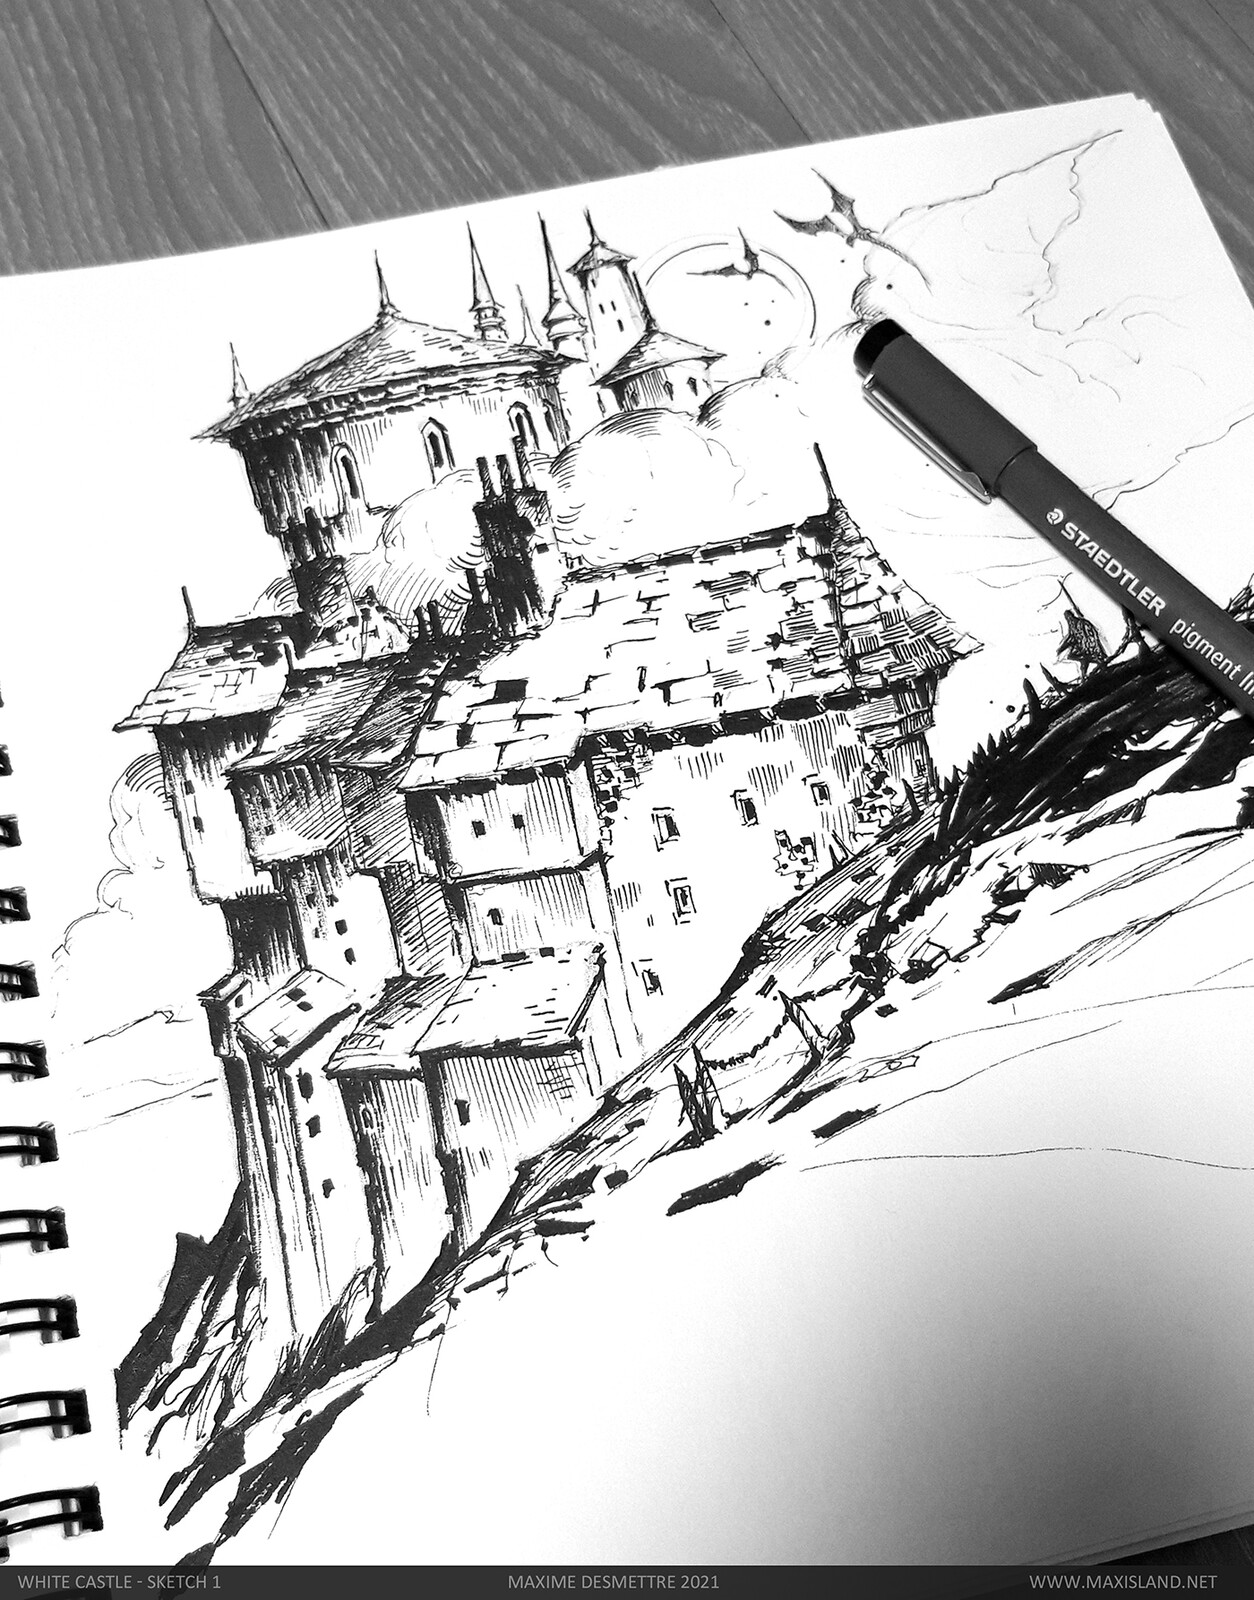 Sketch 1 (foreground)
Pen on paper